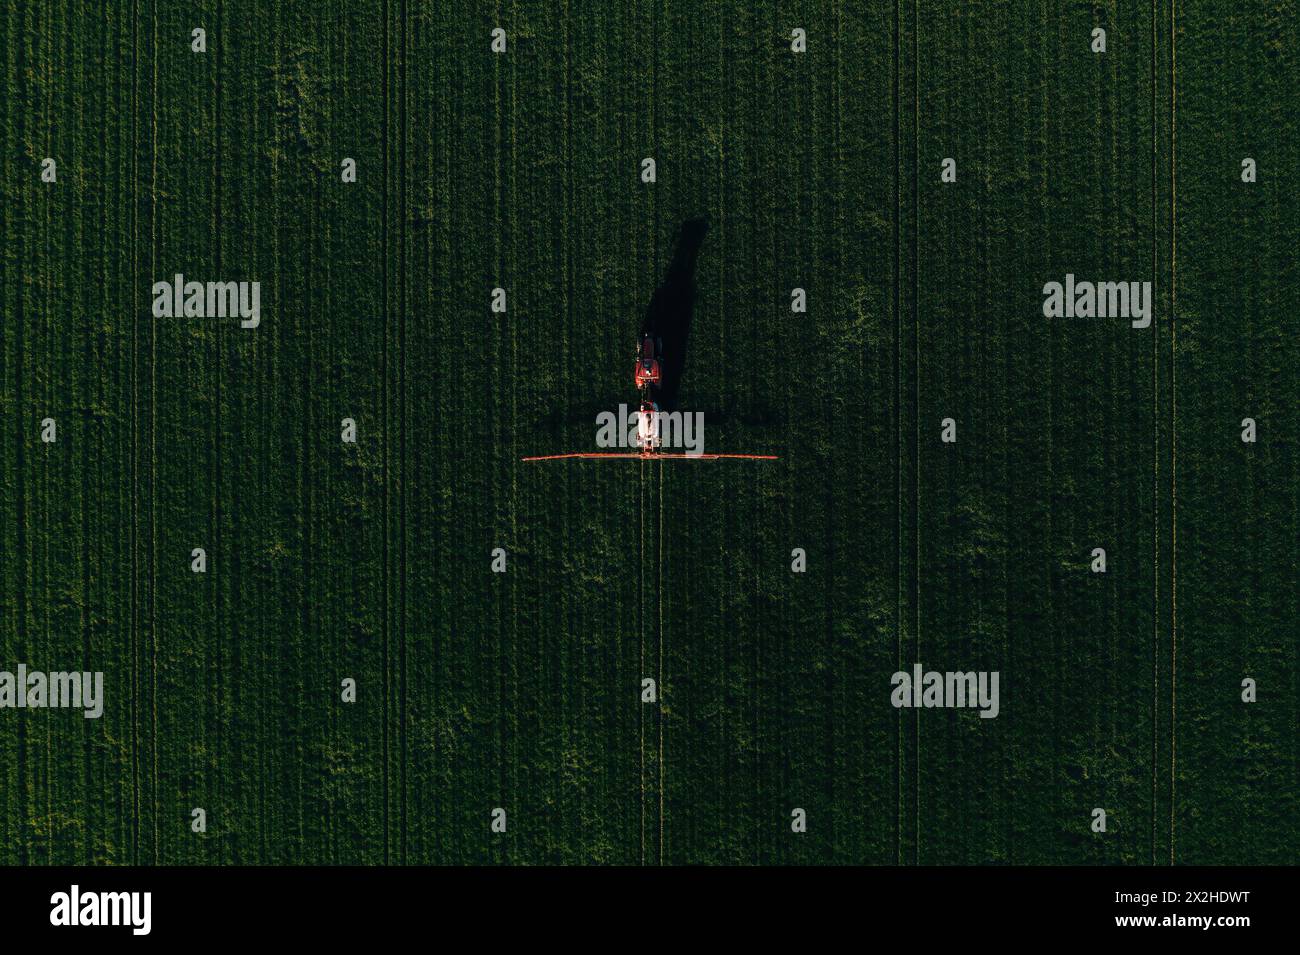 Agricultural tractor with crop sprayer applying fungicide treatment on wheat crops in spring, aerial view from drone pov, top down Stock Photo